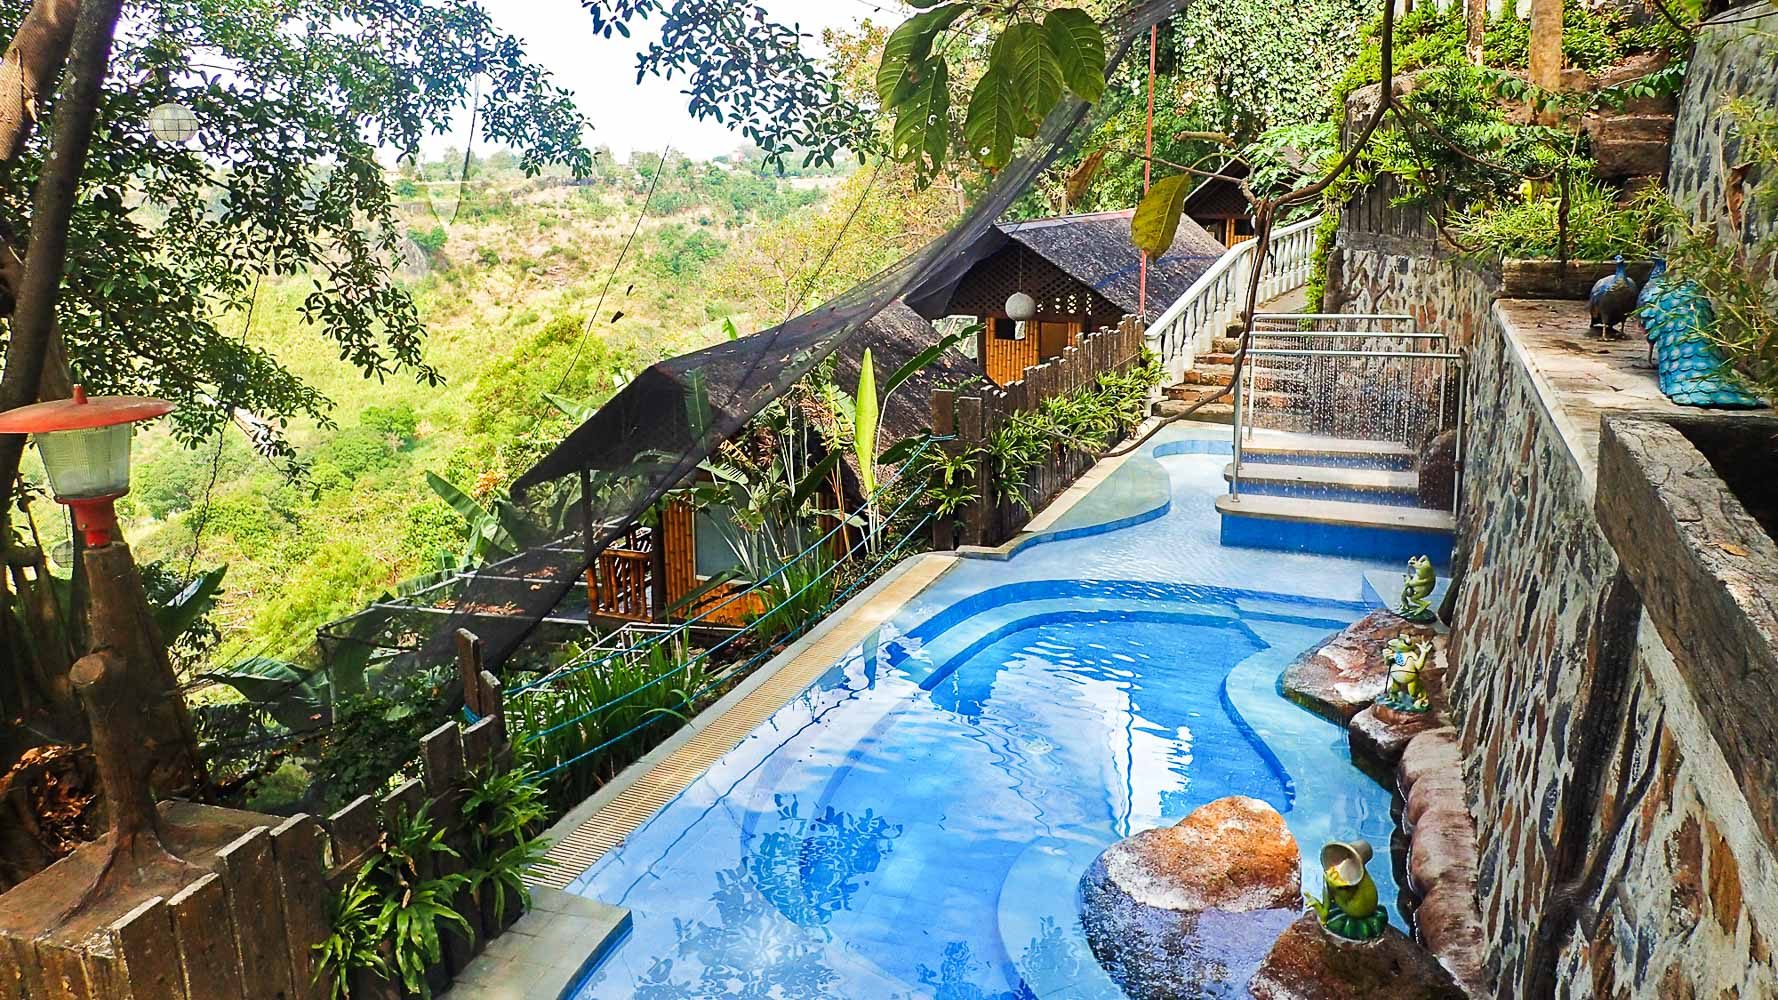 Luljetta’s hanging gardens and spa – inside this getaway, 1 hour from Manila